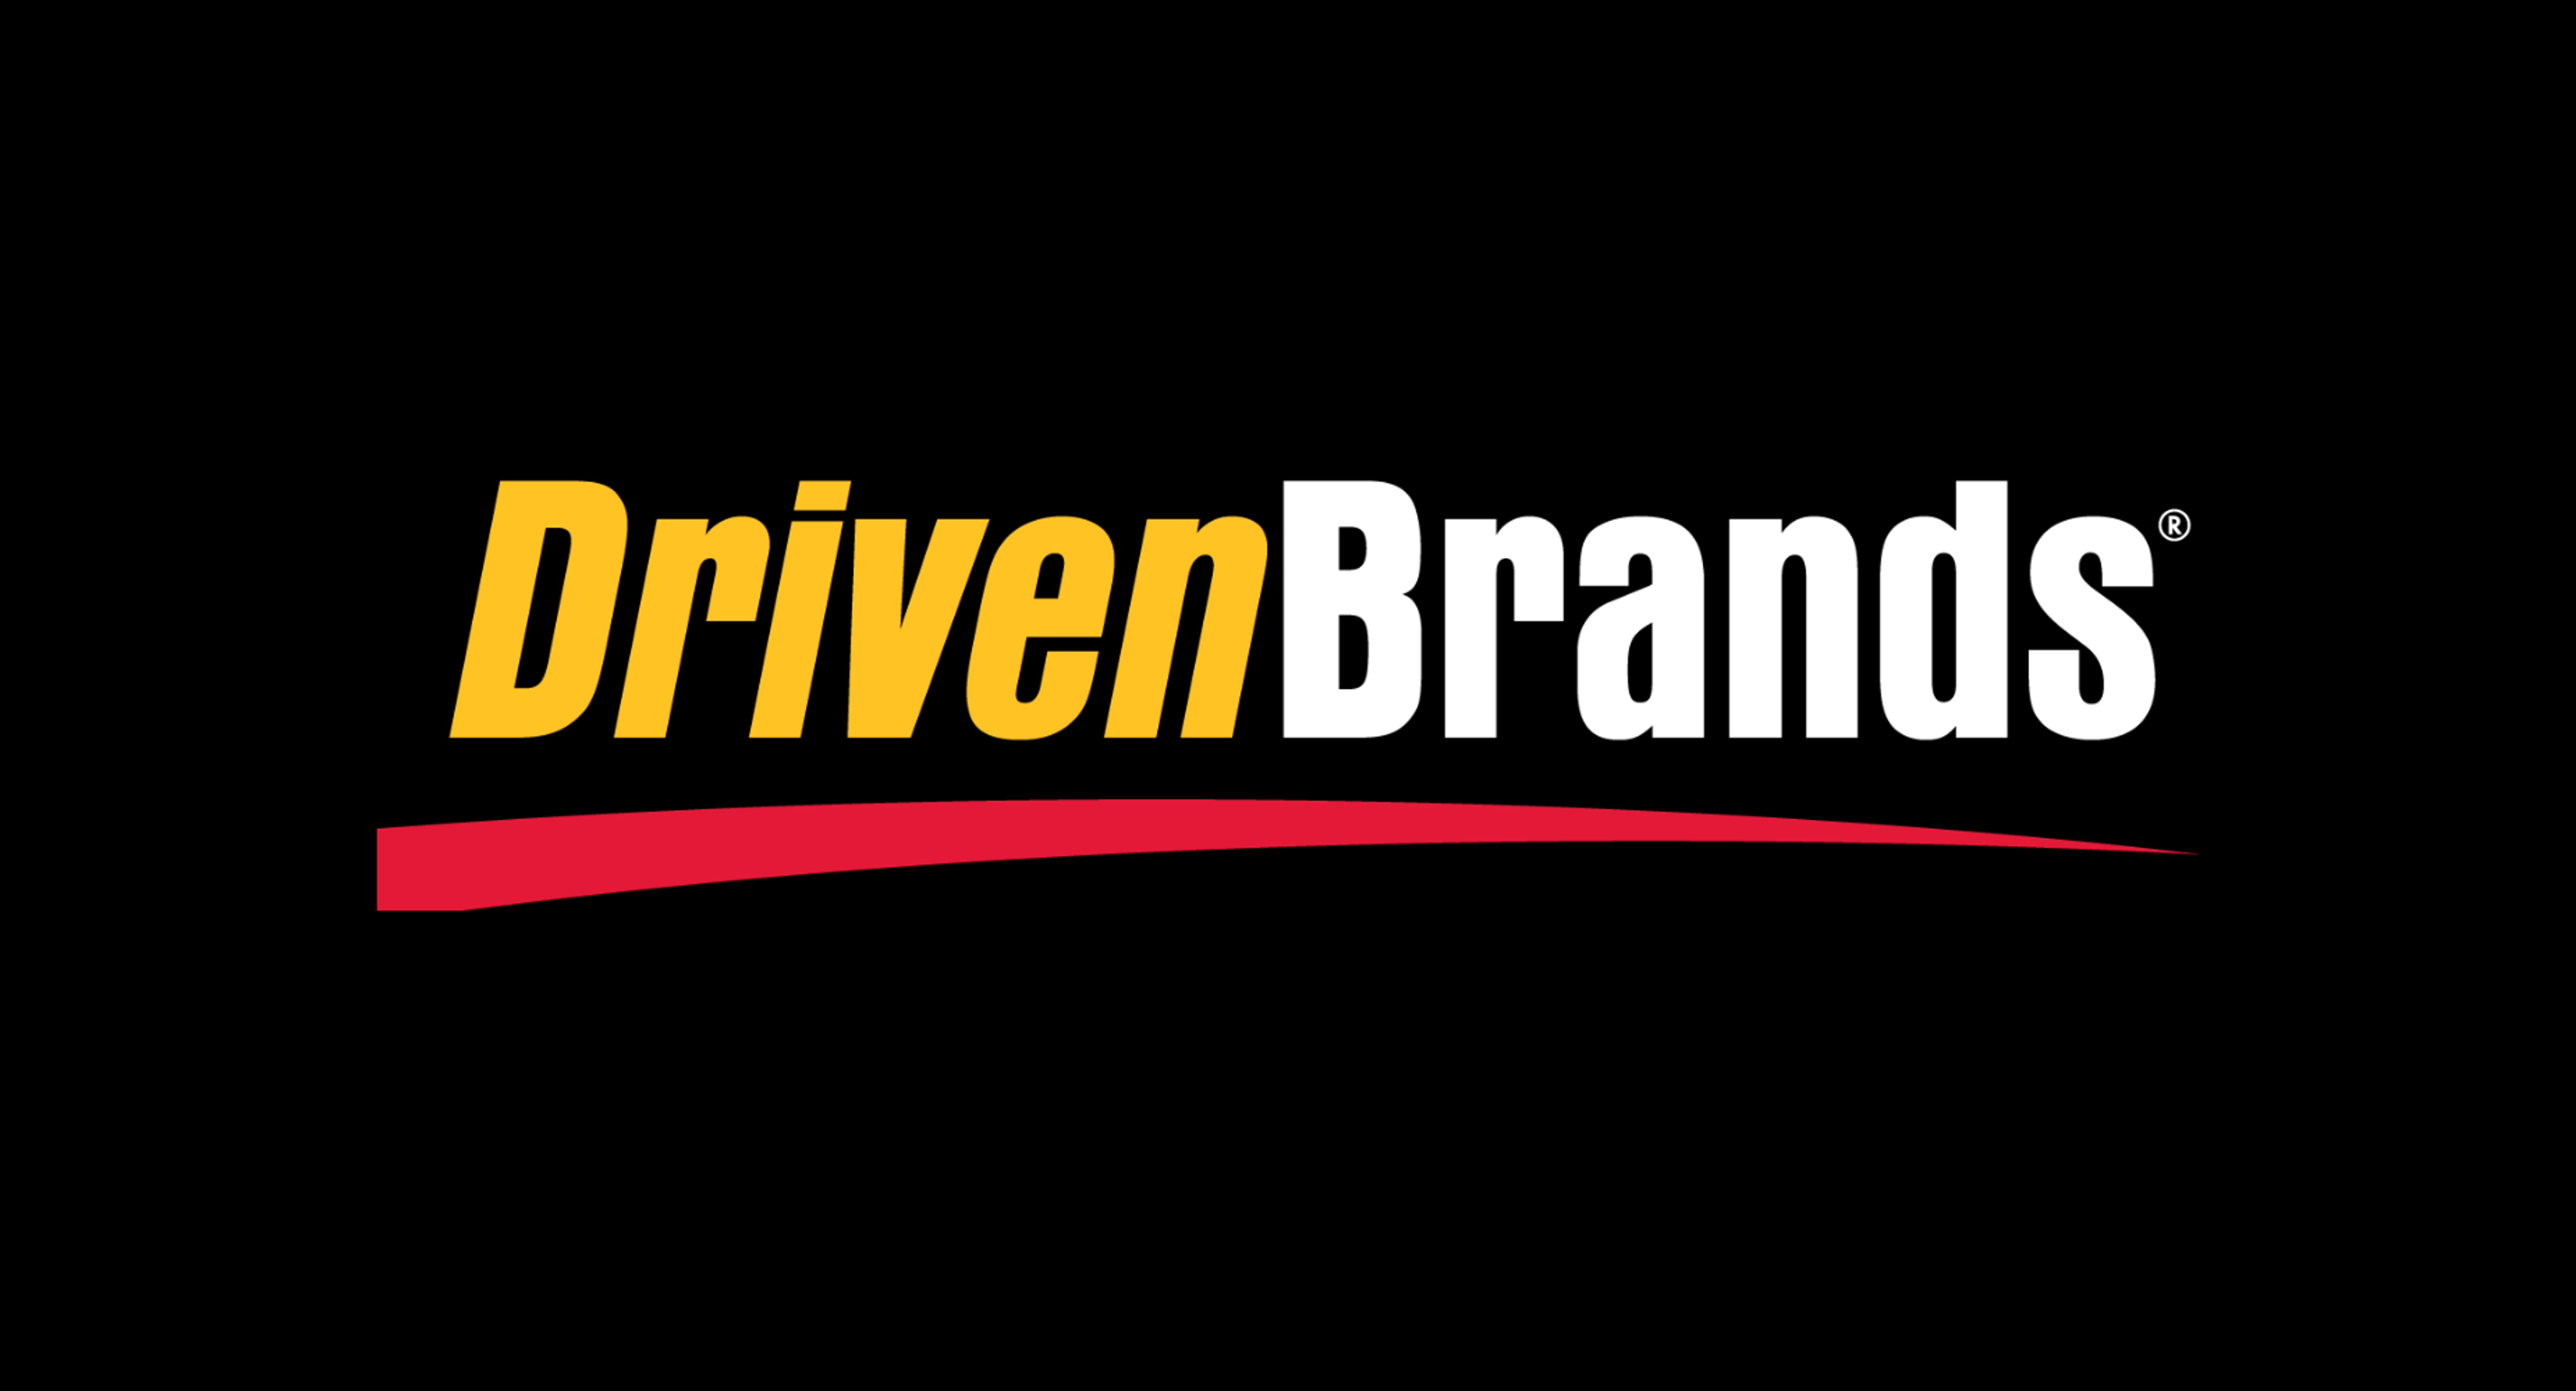 Automotive Services Provider Driven Brands Adopts $50M Share Buyback Program